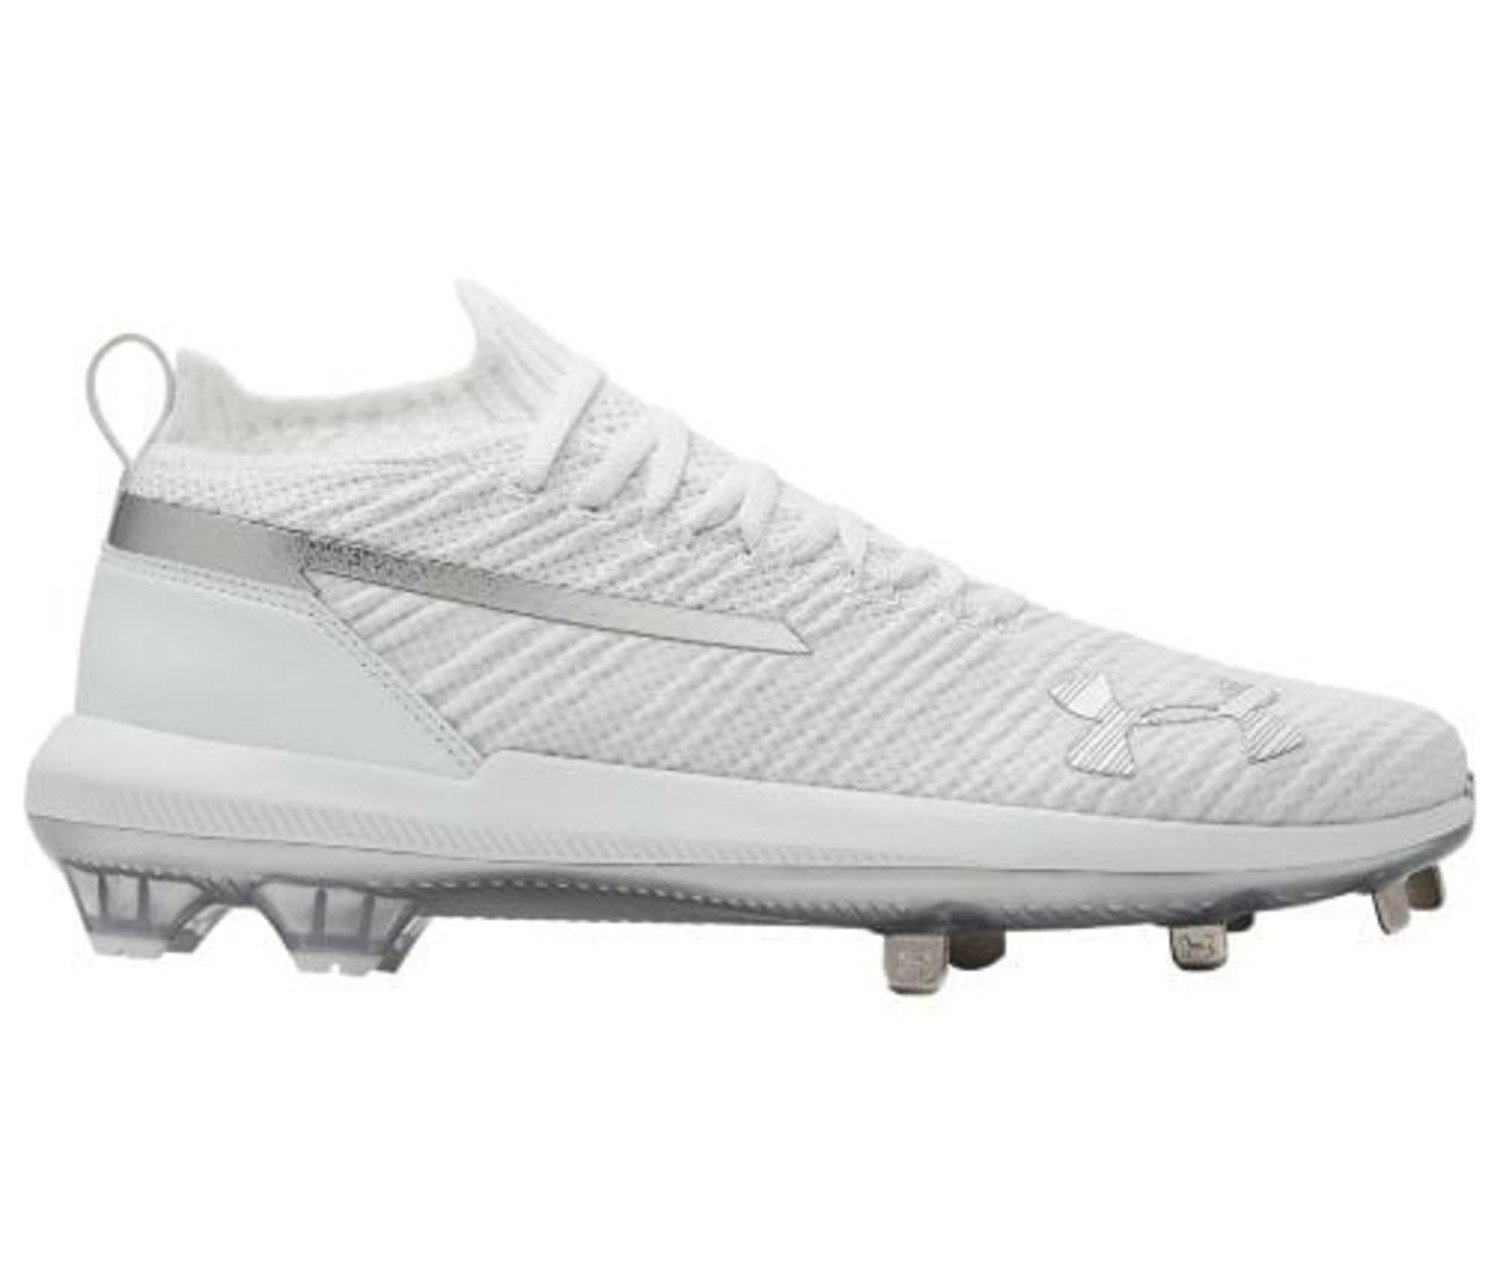 all white low top under armour cleats